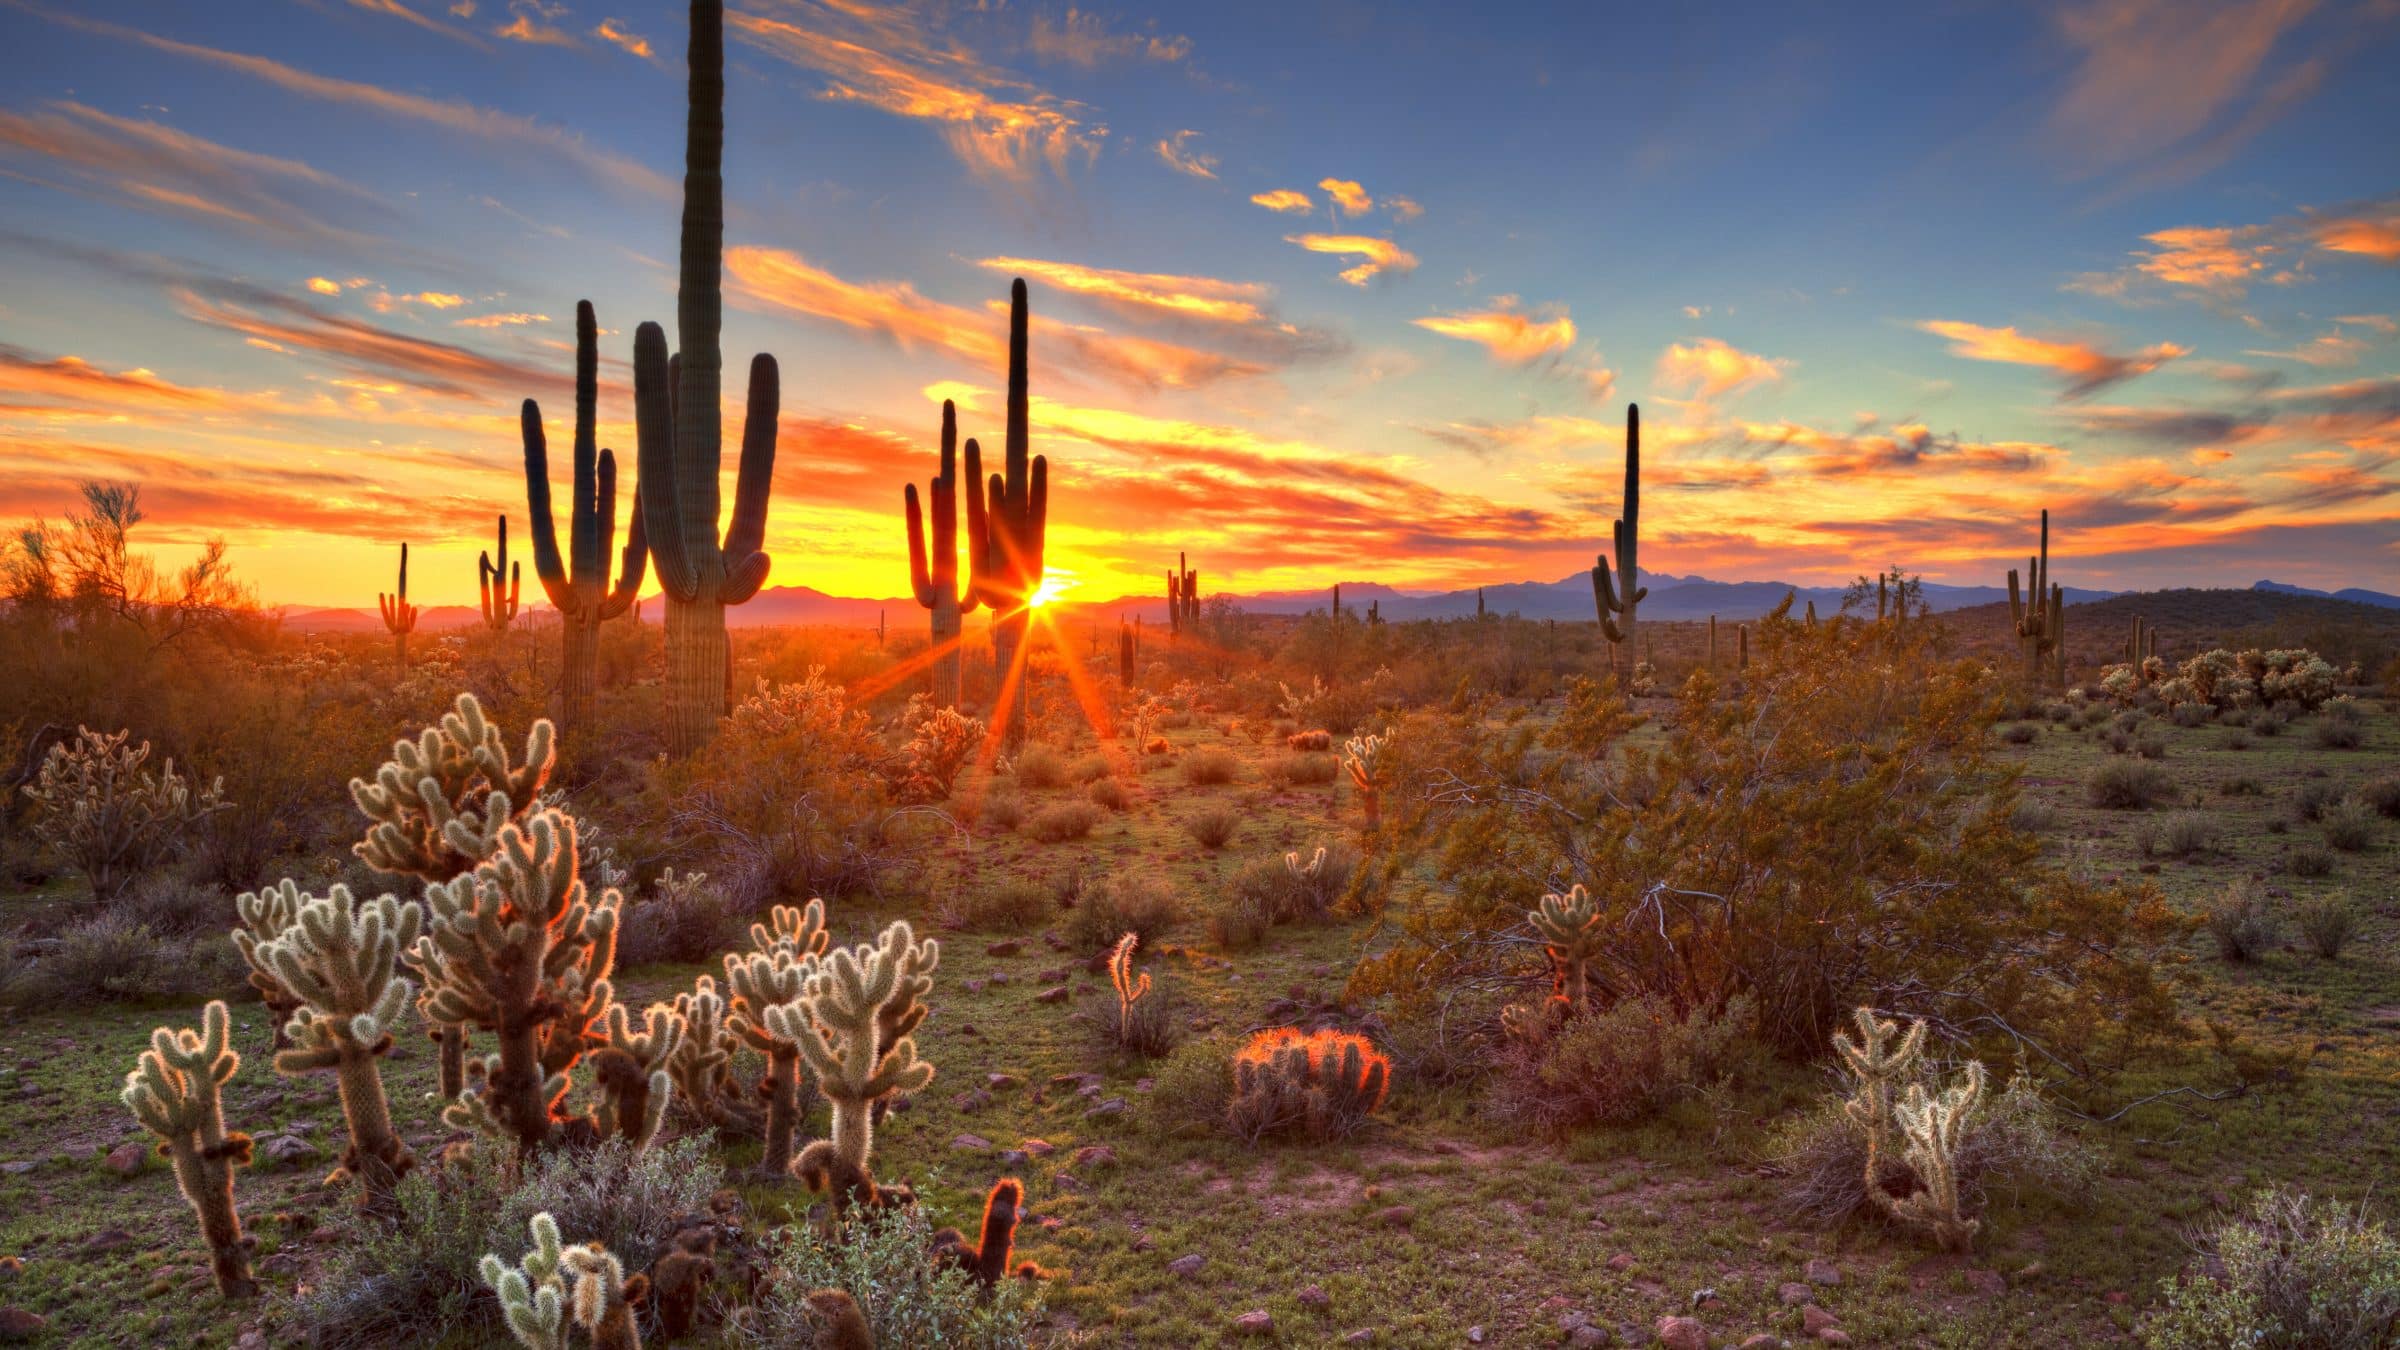 Arizona weather and climate ☀️ Best time to visit 🌡️ Temperature